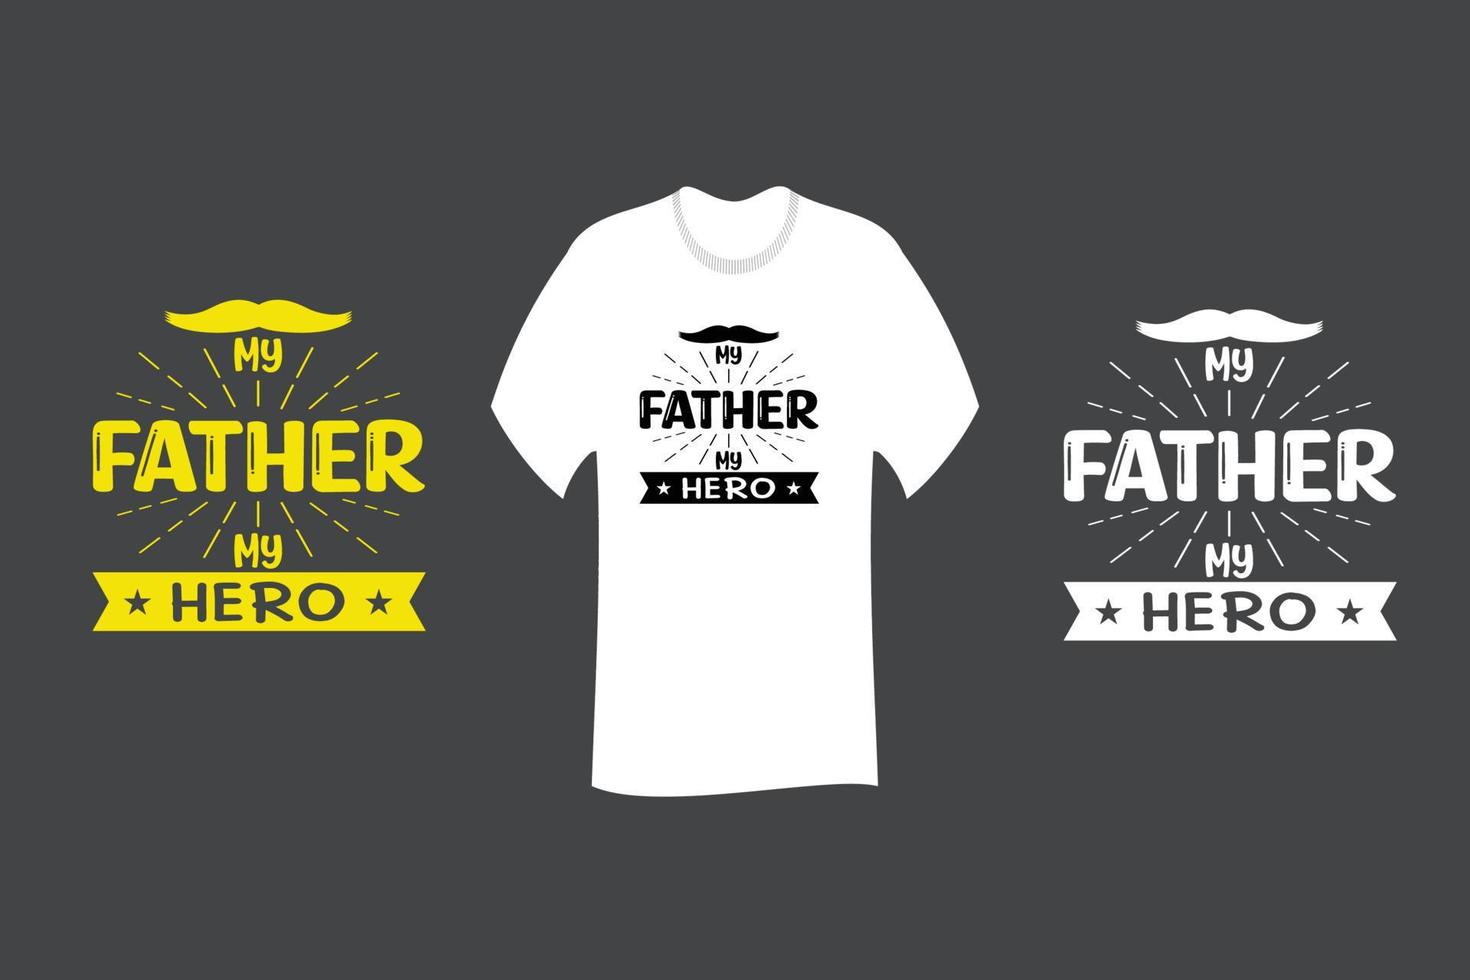 My Father My hero T Shirt Design vector